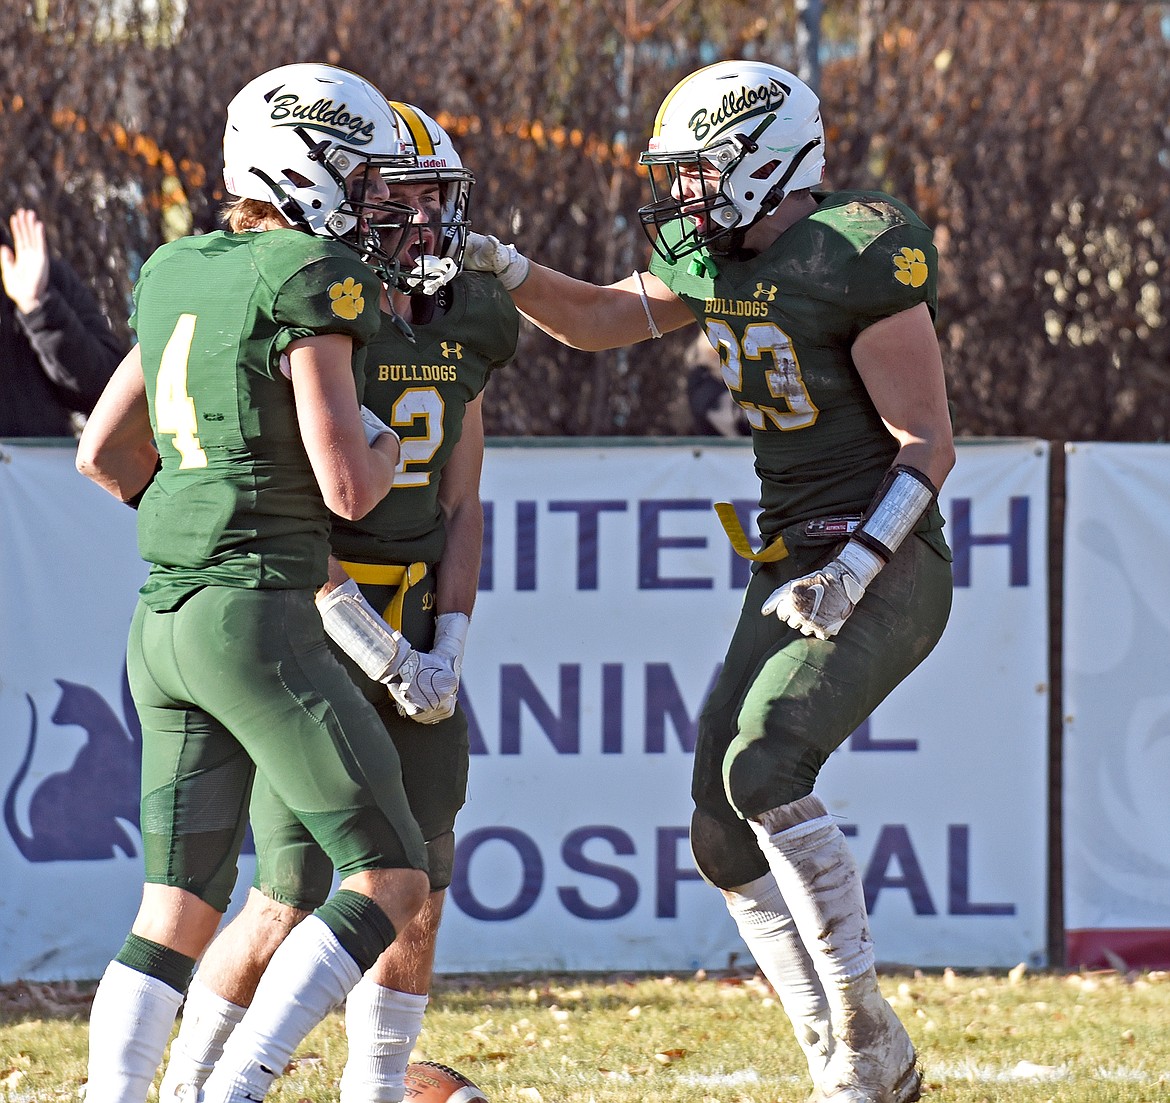 Whitefish players Jaxsen Schlauch (4) and Ty Schwaiger (23) celebrate with Bodie Smith (2) after he catches a huge pass in the end zone during a playoff game against Frenchtown on Saturday in Whitefish. (Whitney England/Whitefish Pilot)